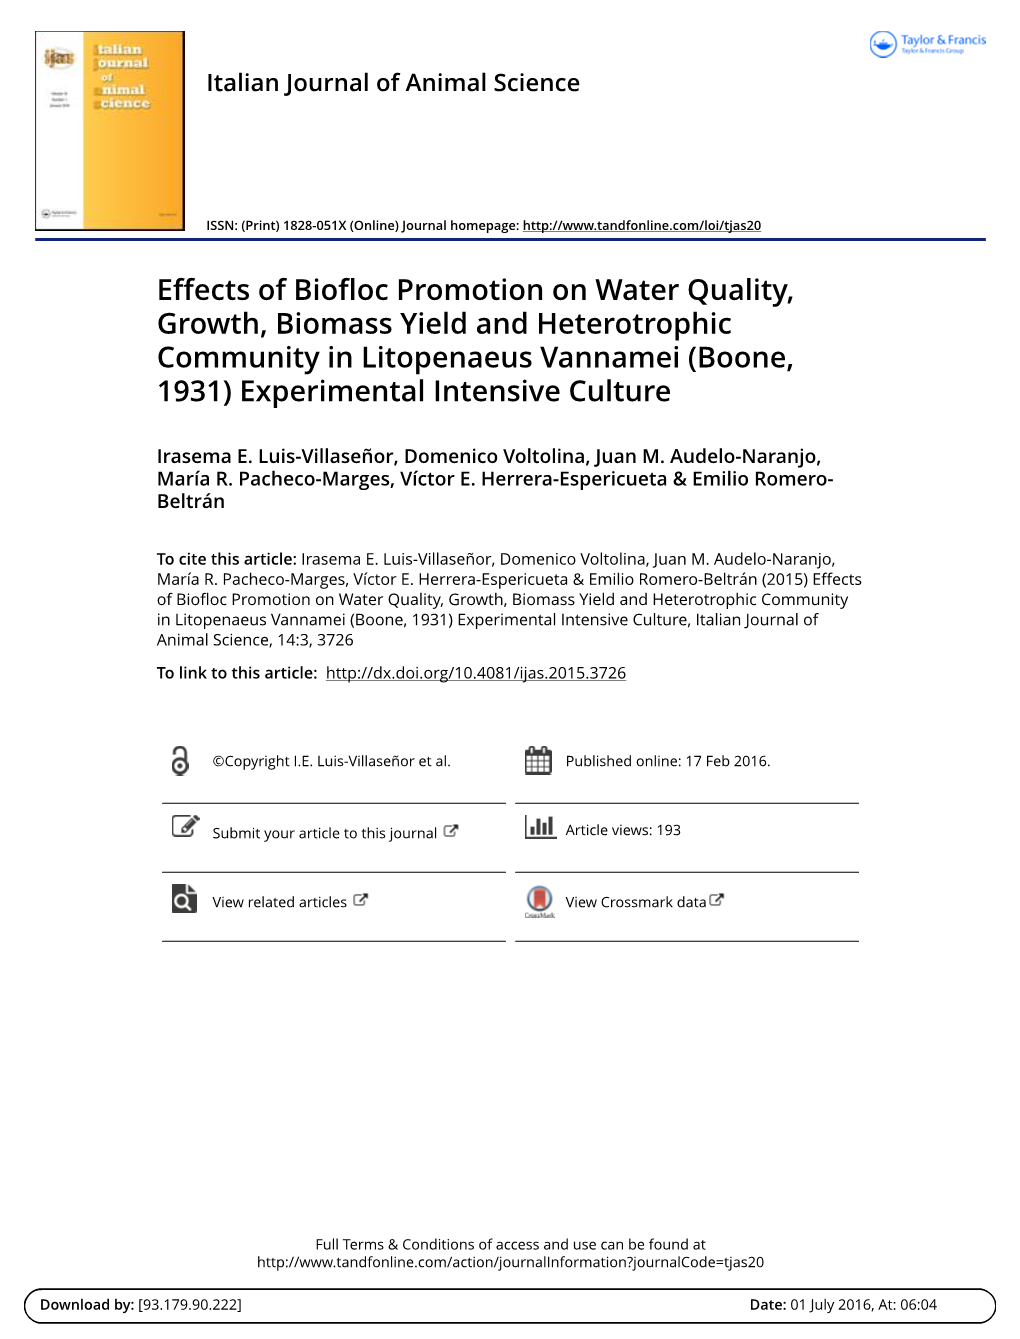 Effects of Biofloc Promotion on Water Quality, Growth, Biomass Yield and Heterotrophic Community in Litopenaeus Vannamei (Boone, 1931) Experimental Intensive Culture